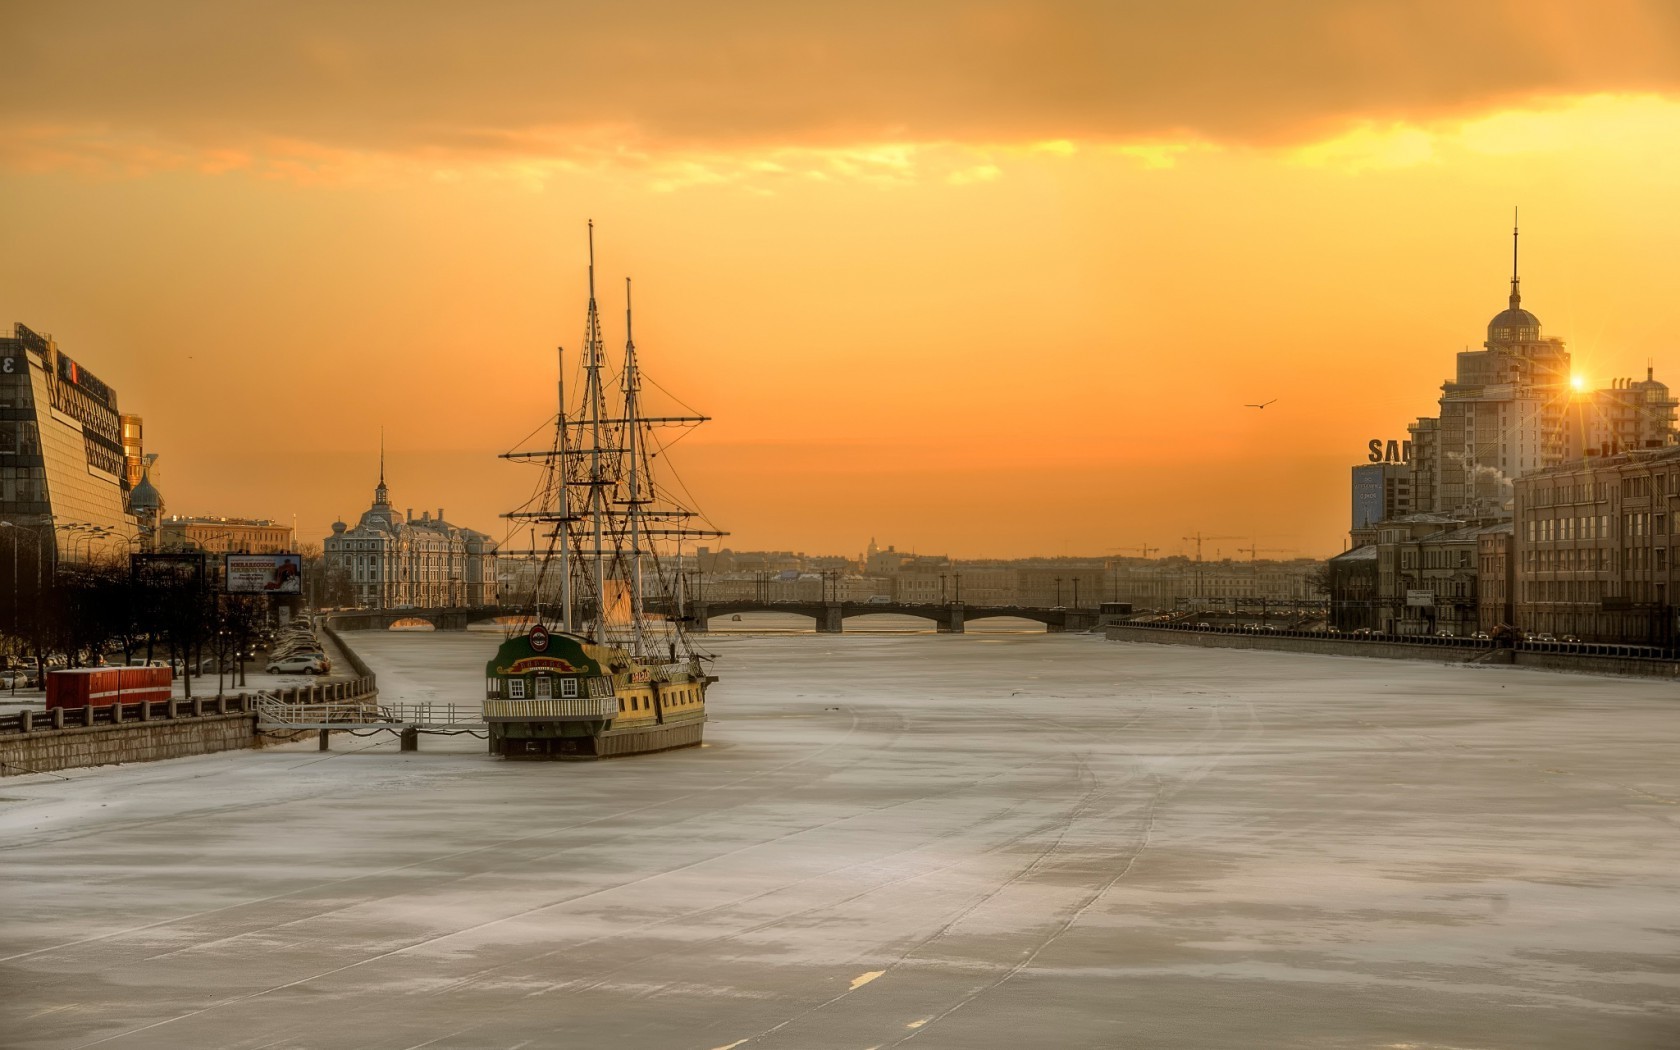 cityscape, Sun, Sunset, River, Bridge, St. Petersburg, Russia, Cathedral, Architecture, Building, Ship, Ice, Frost Wallpaper